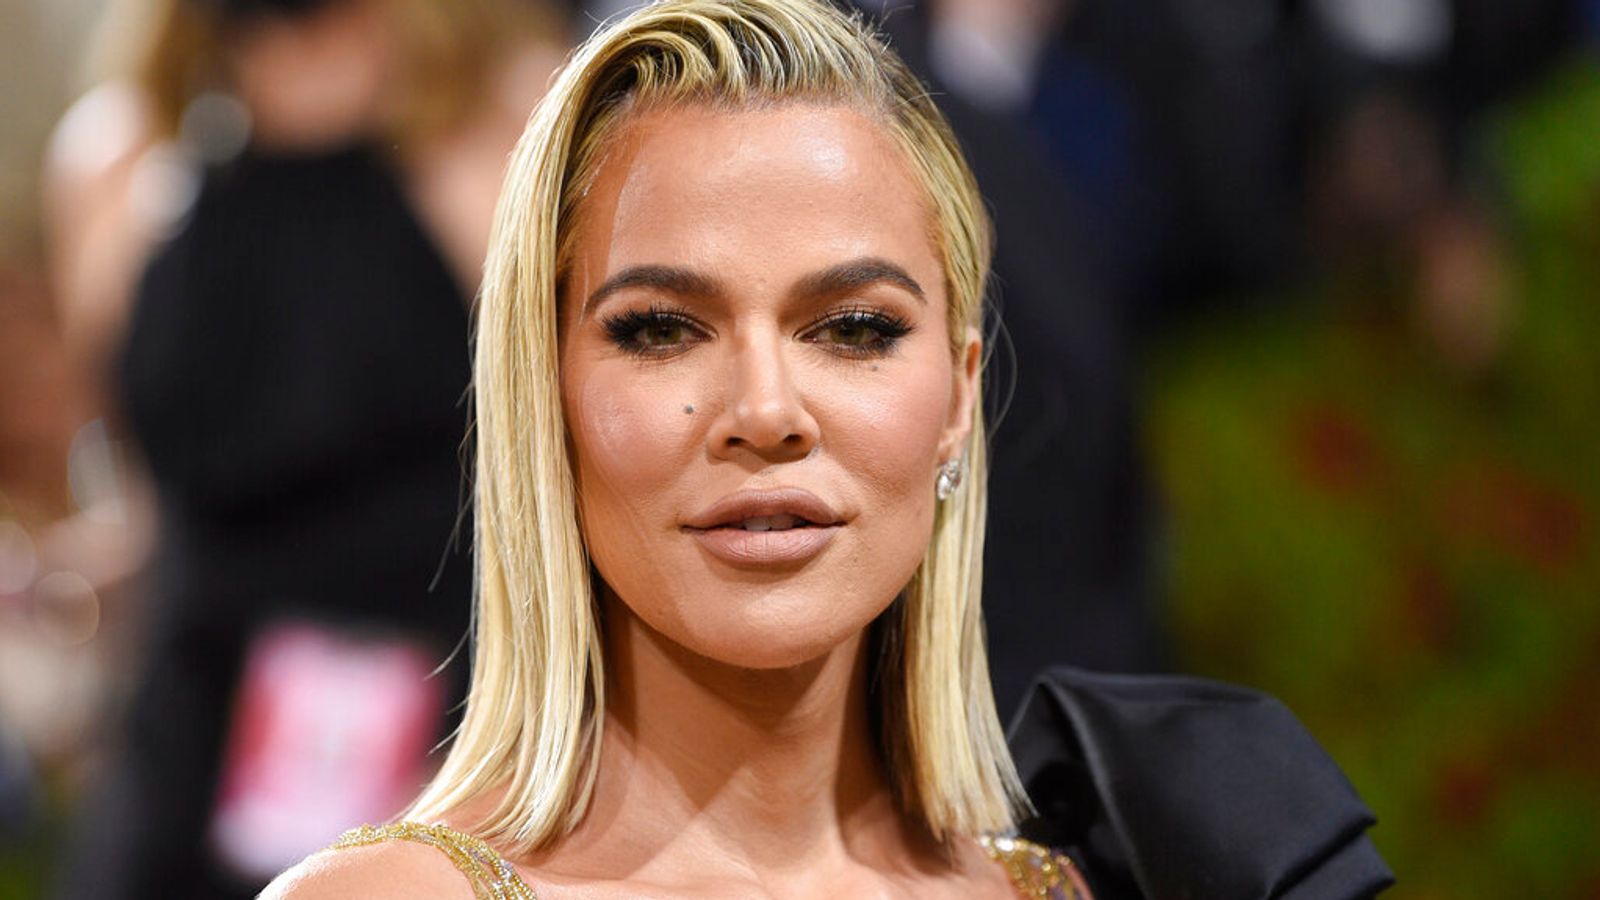 Khloe Kardashian has 'incredibly rare' tumour she thought was a spot removed from face - and urges fans to get checked